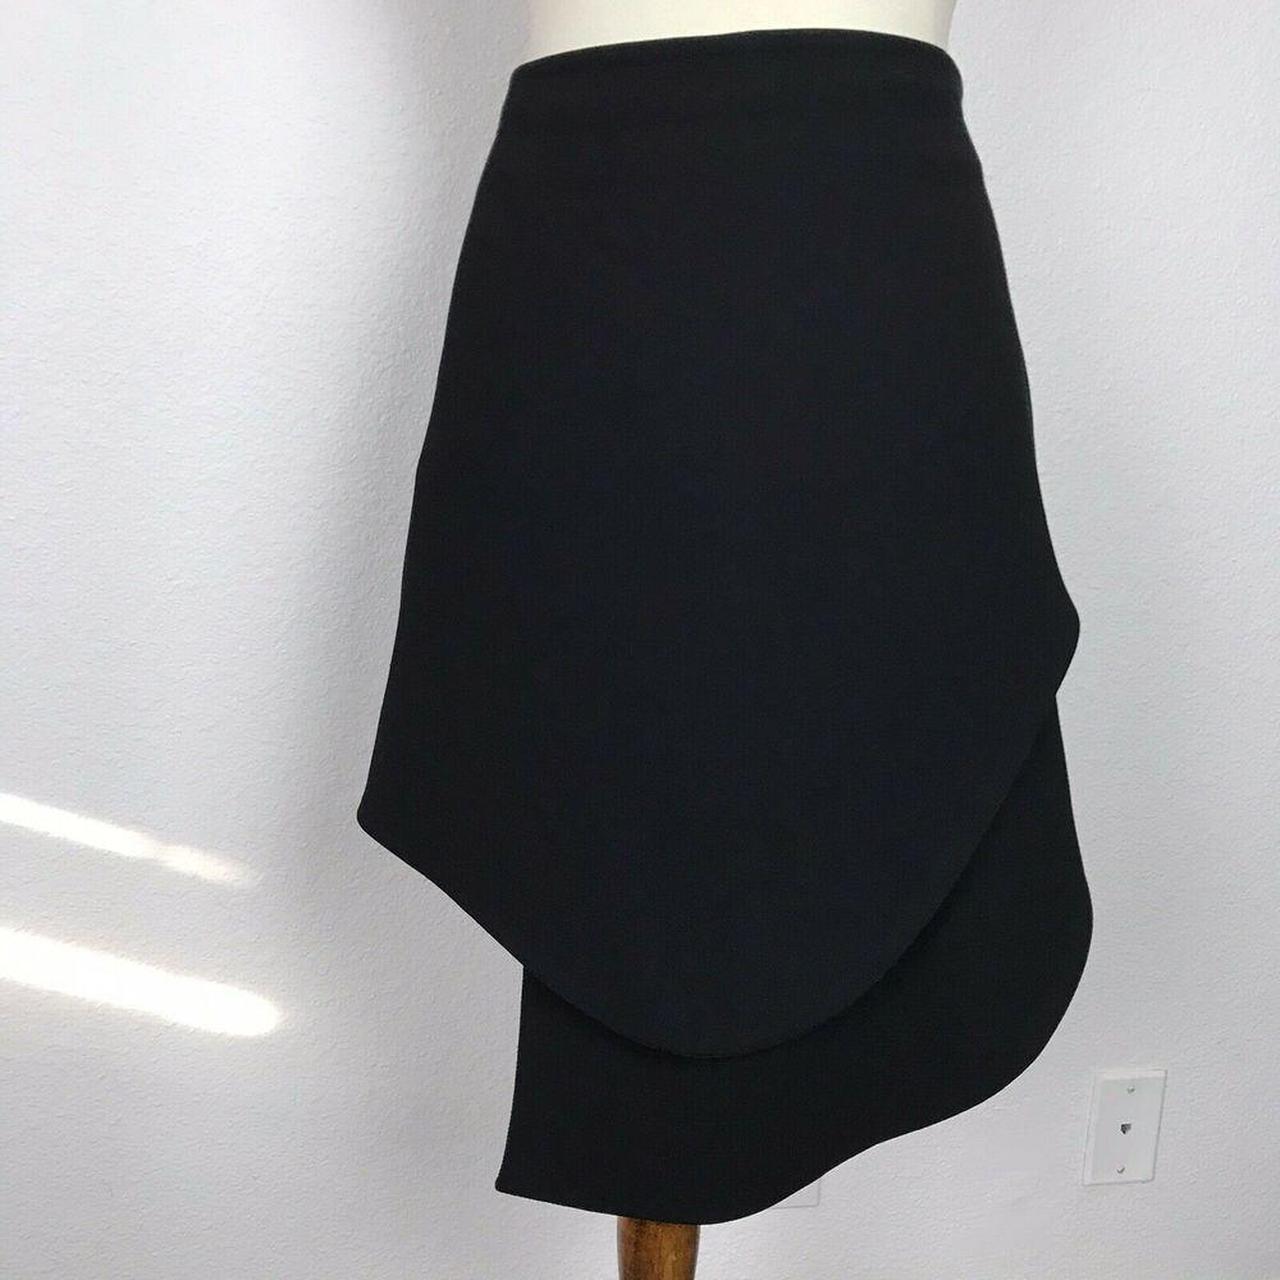 Product Image 2 - Opening Ceremony Asymmetric Mini Skirt

Zip

Lined

Size